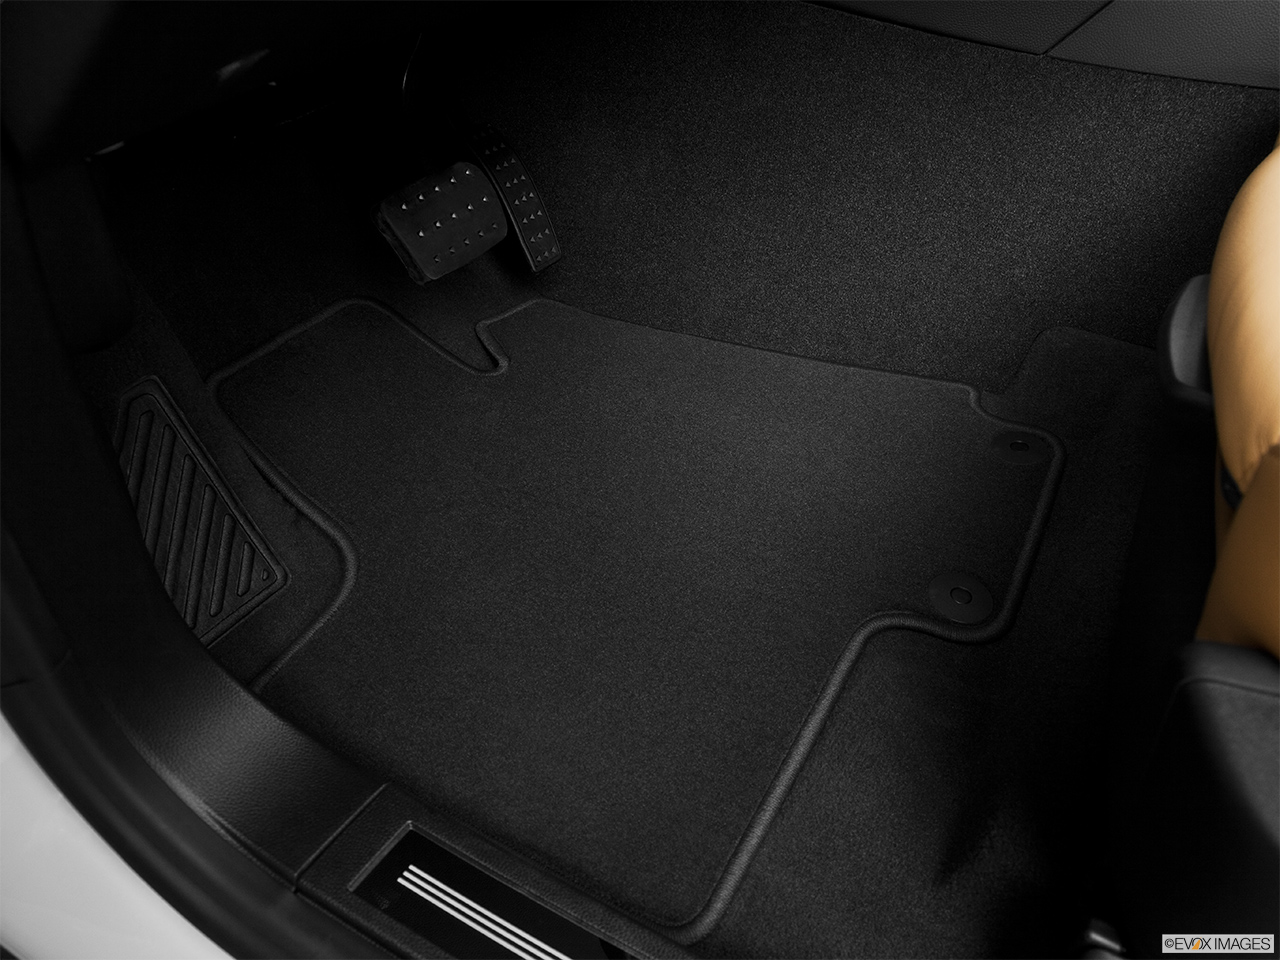 2014 Cadillac SRX Luxury Driver's floor mat and pedals. Mid-seat level from outside looking in. 